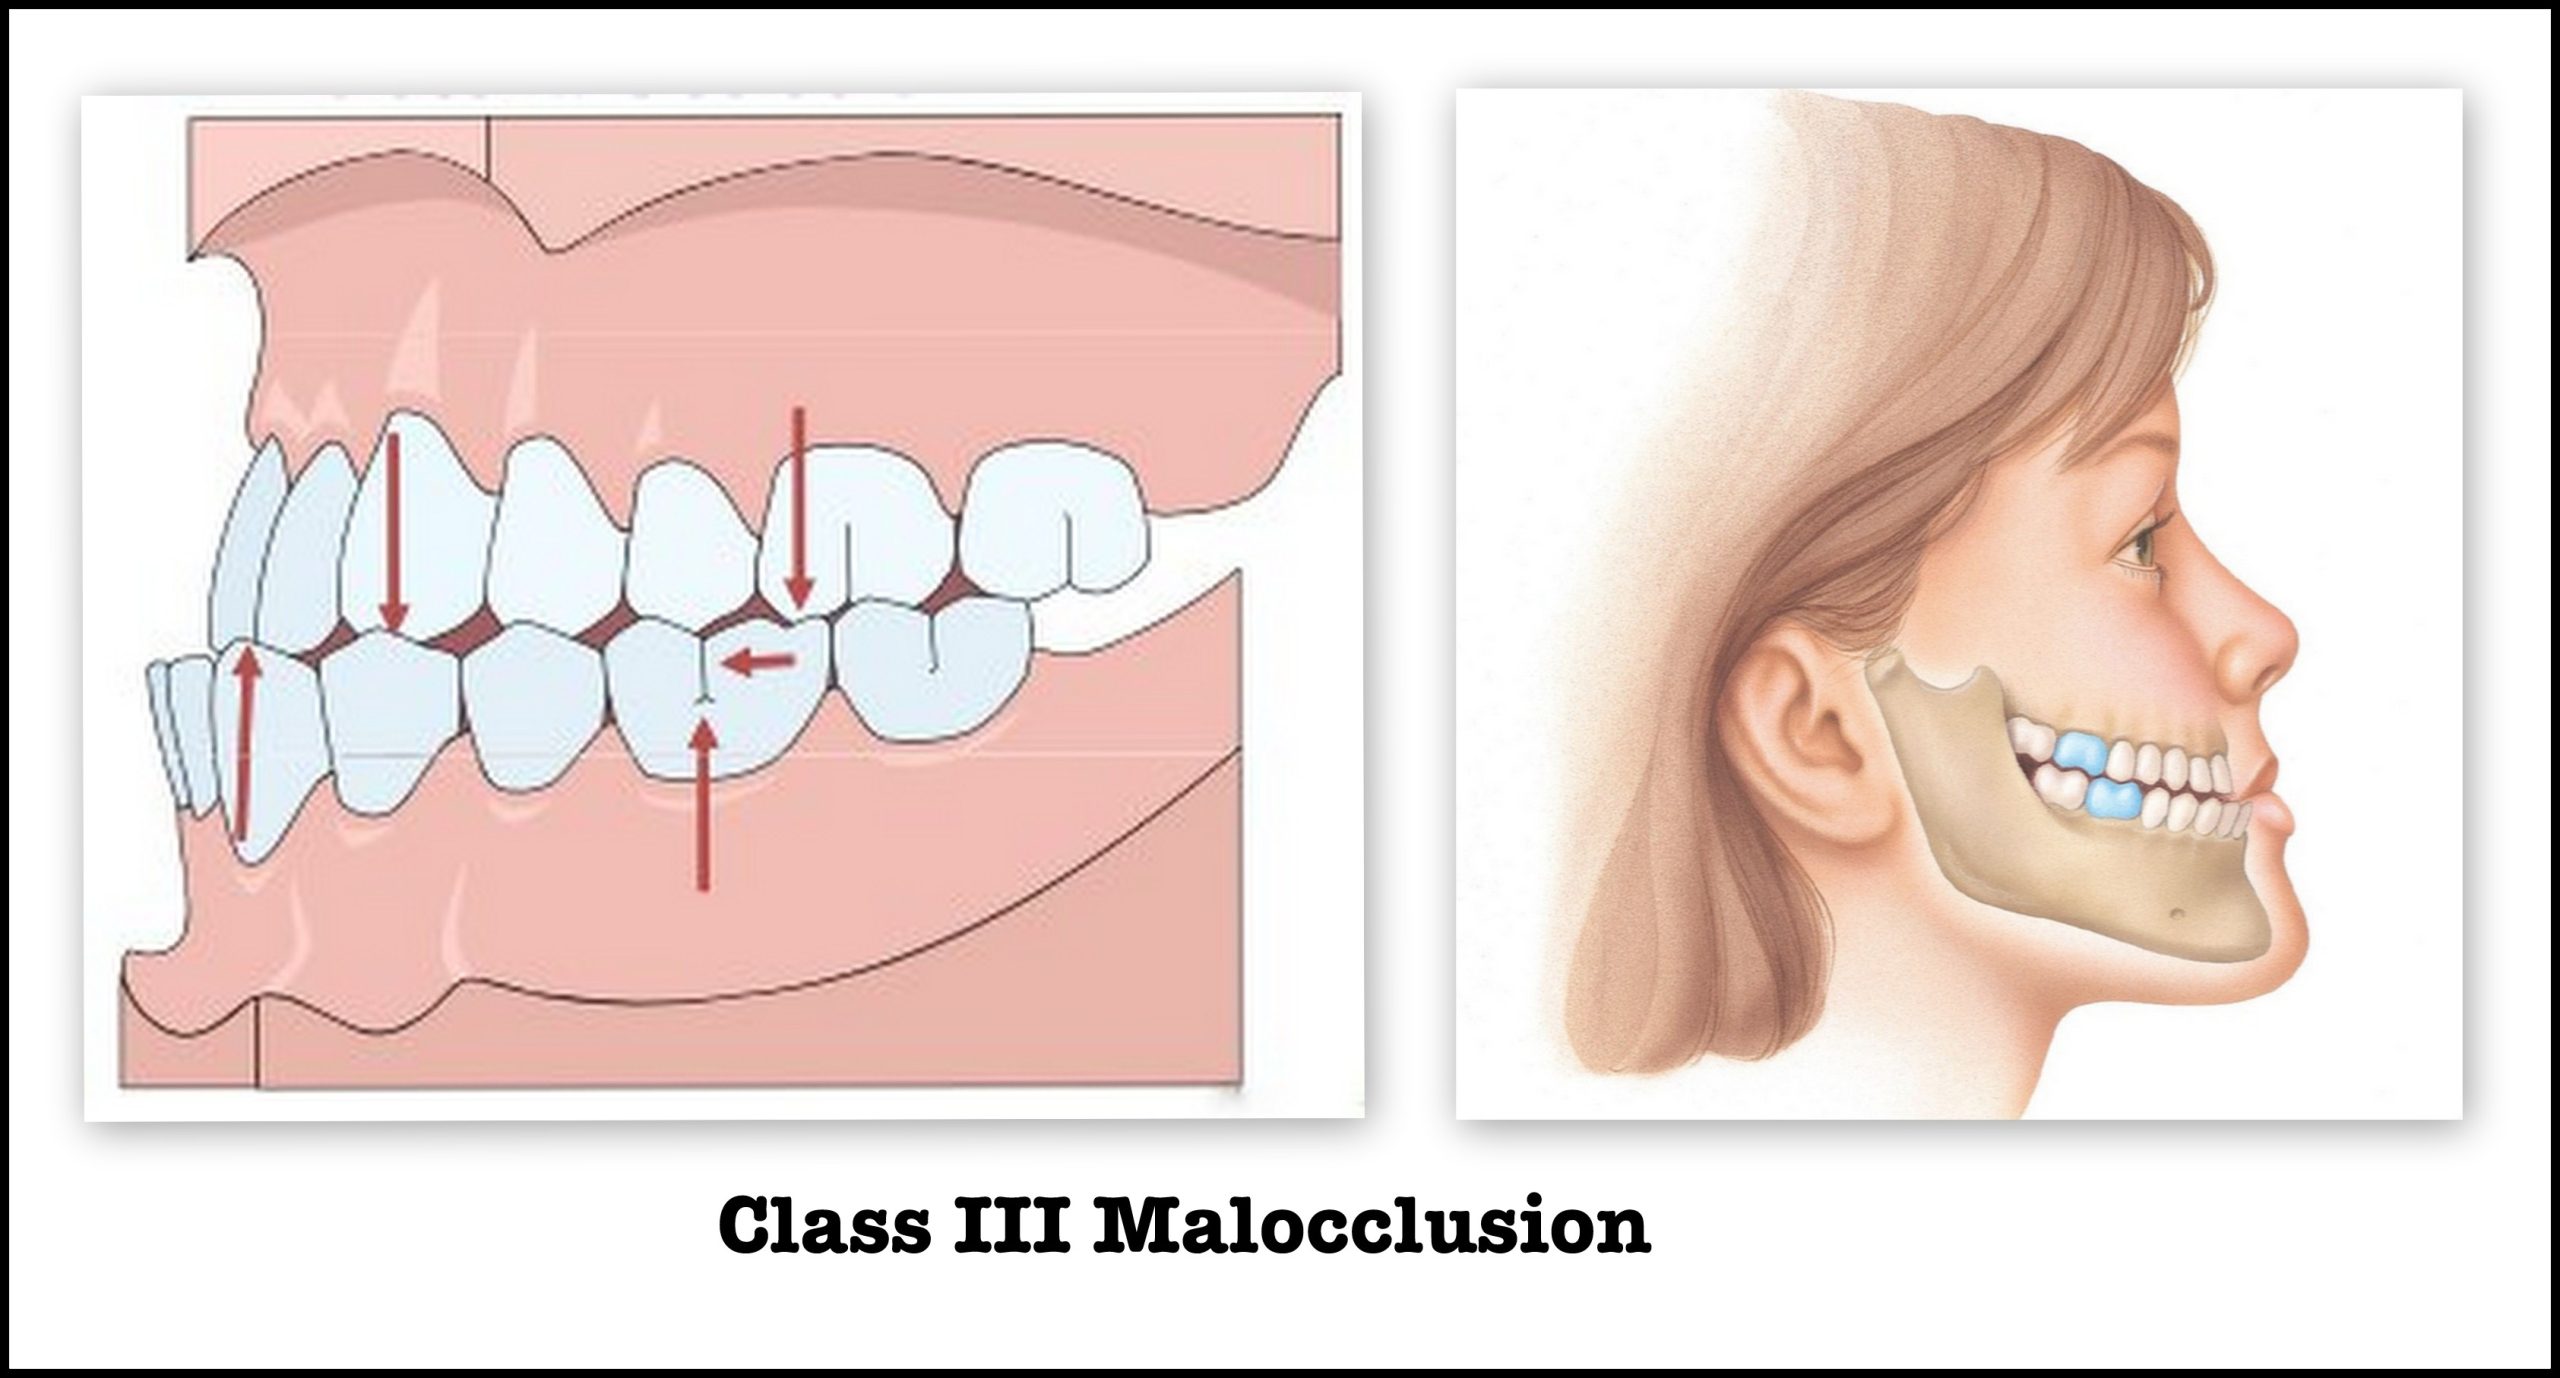 class 3 malocclusion Causes, Diagnosis, and Treatment Options